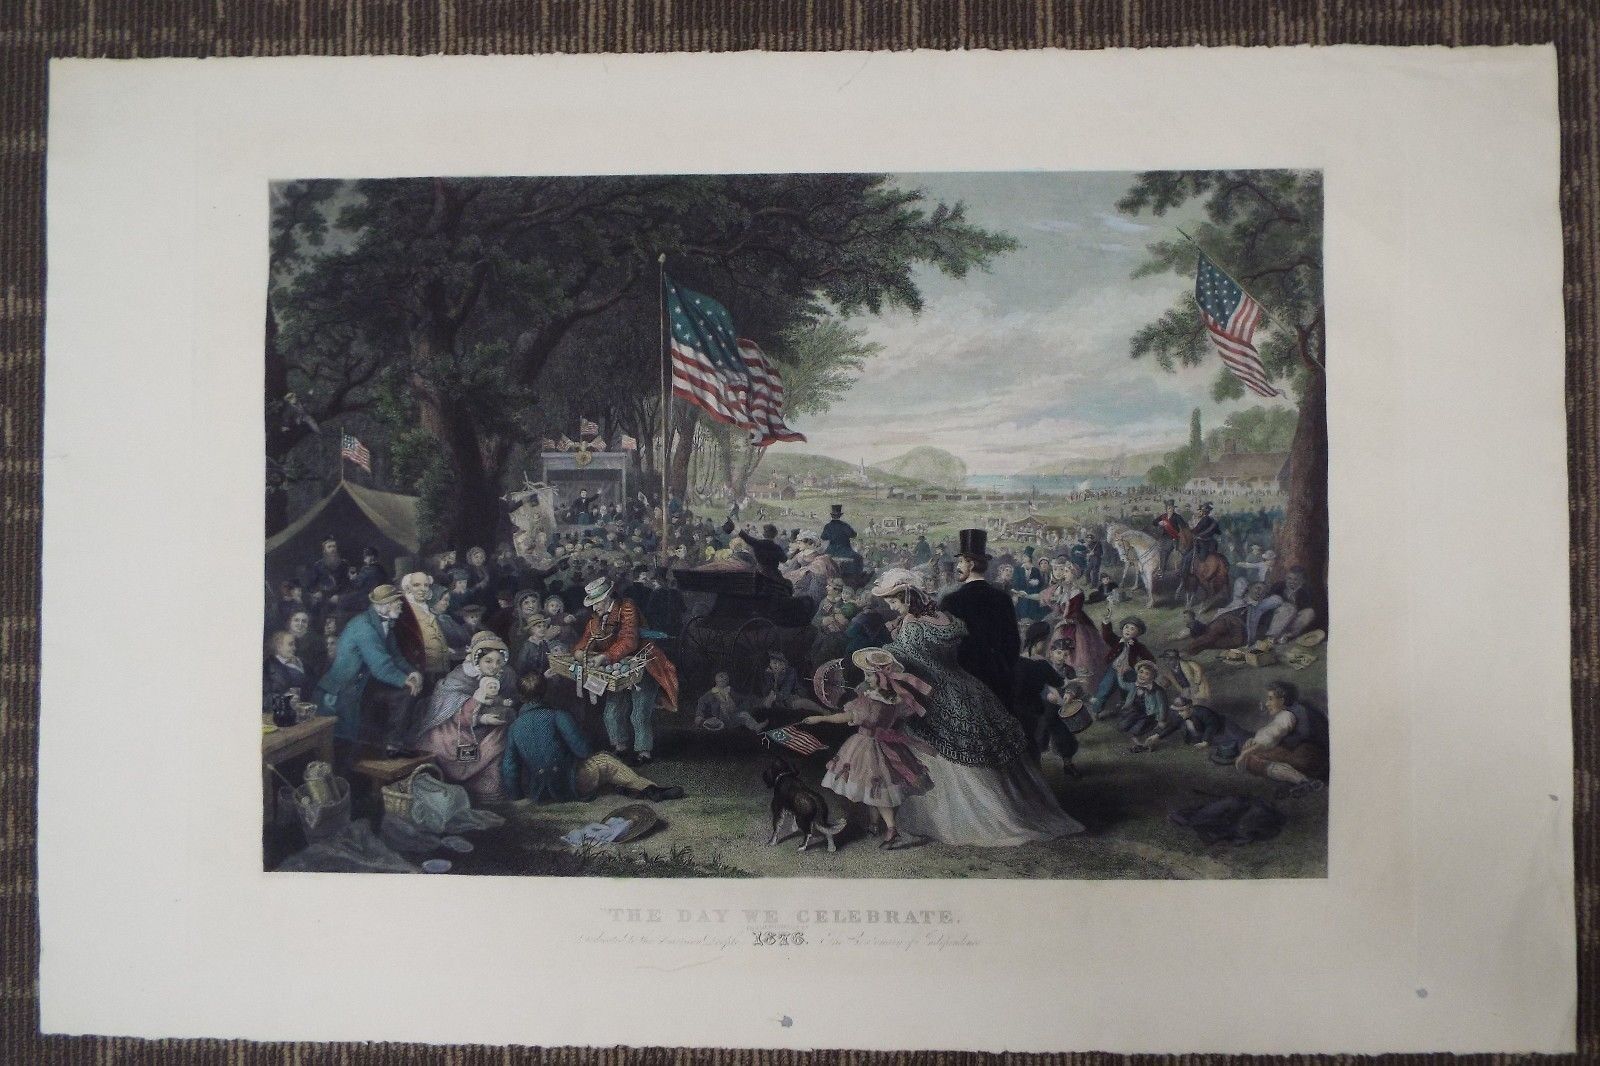 VERY LARGE - Antique Hand Colored Print Engraving - July 4th Celebration - 1876